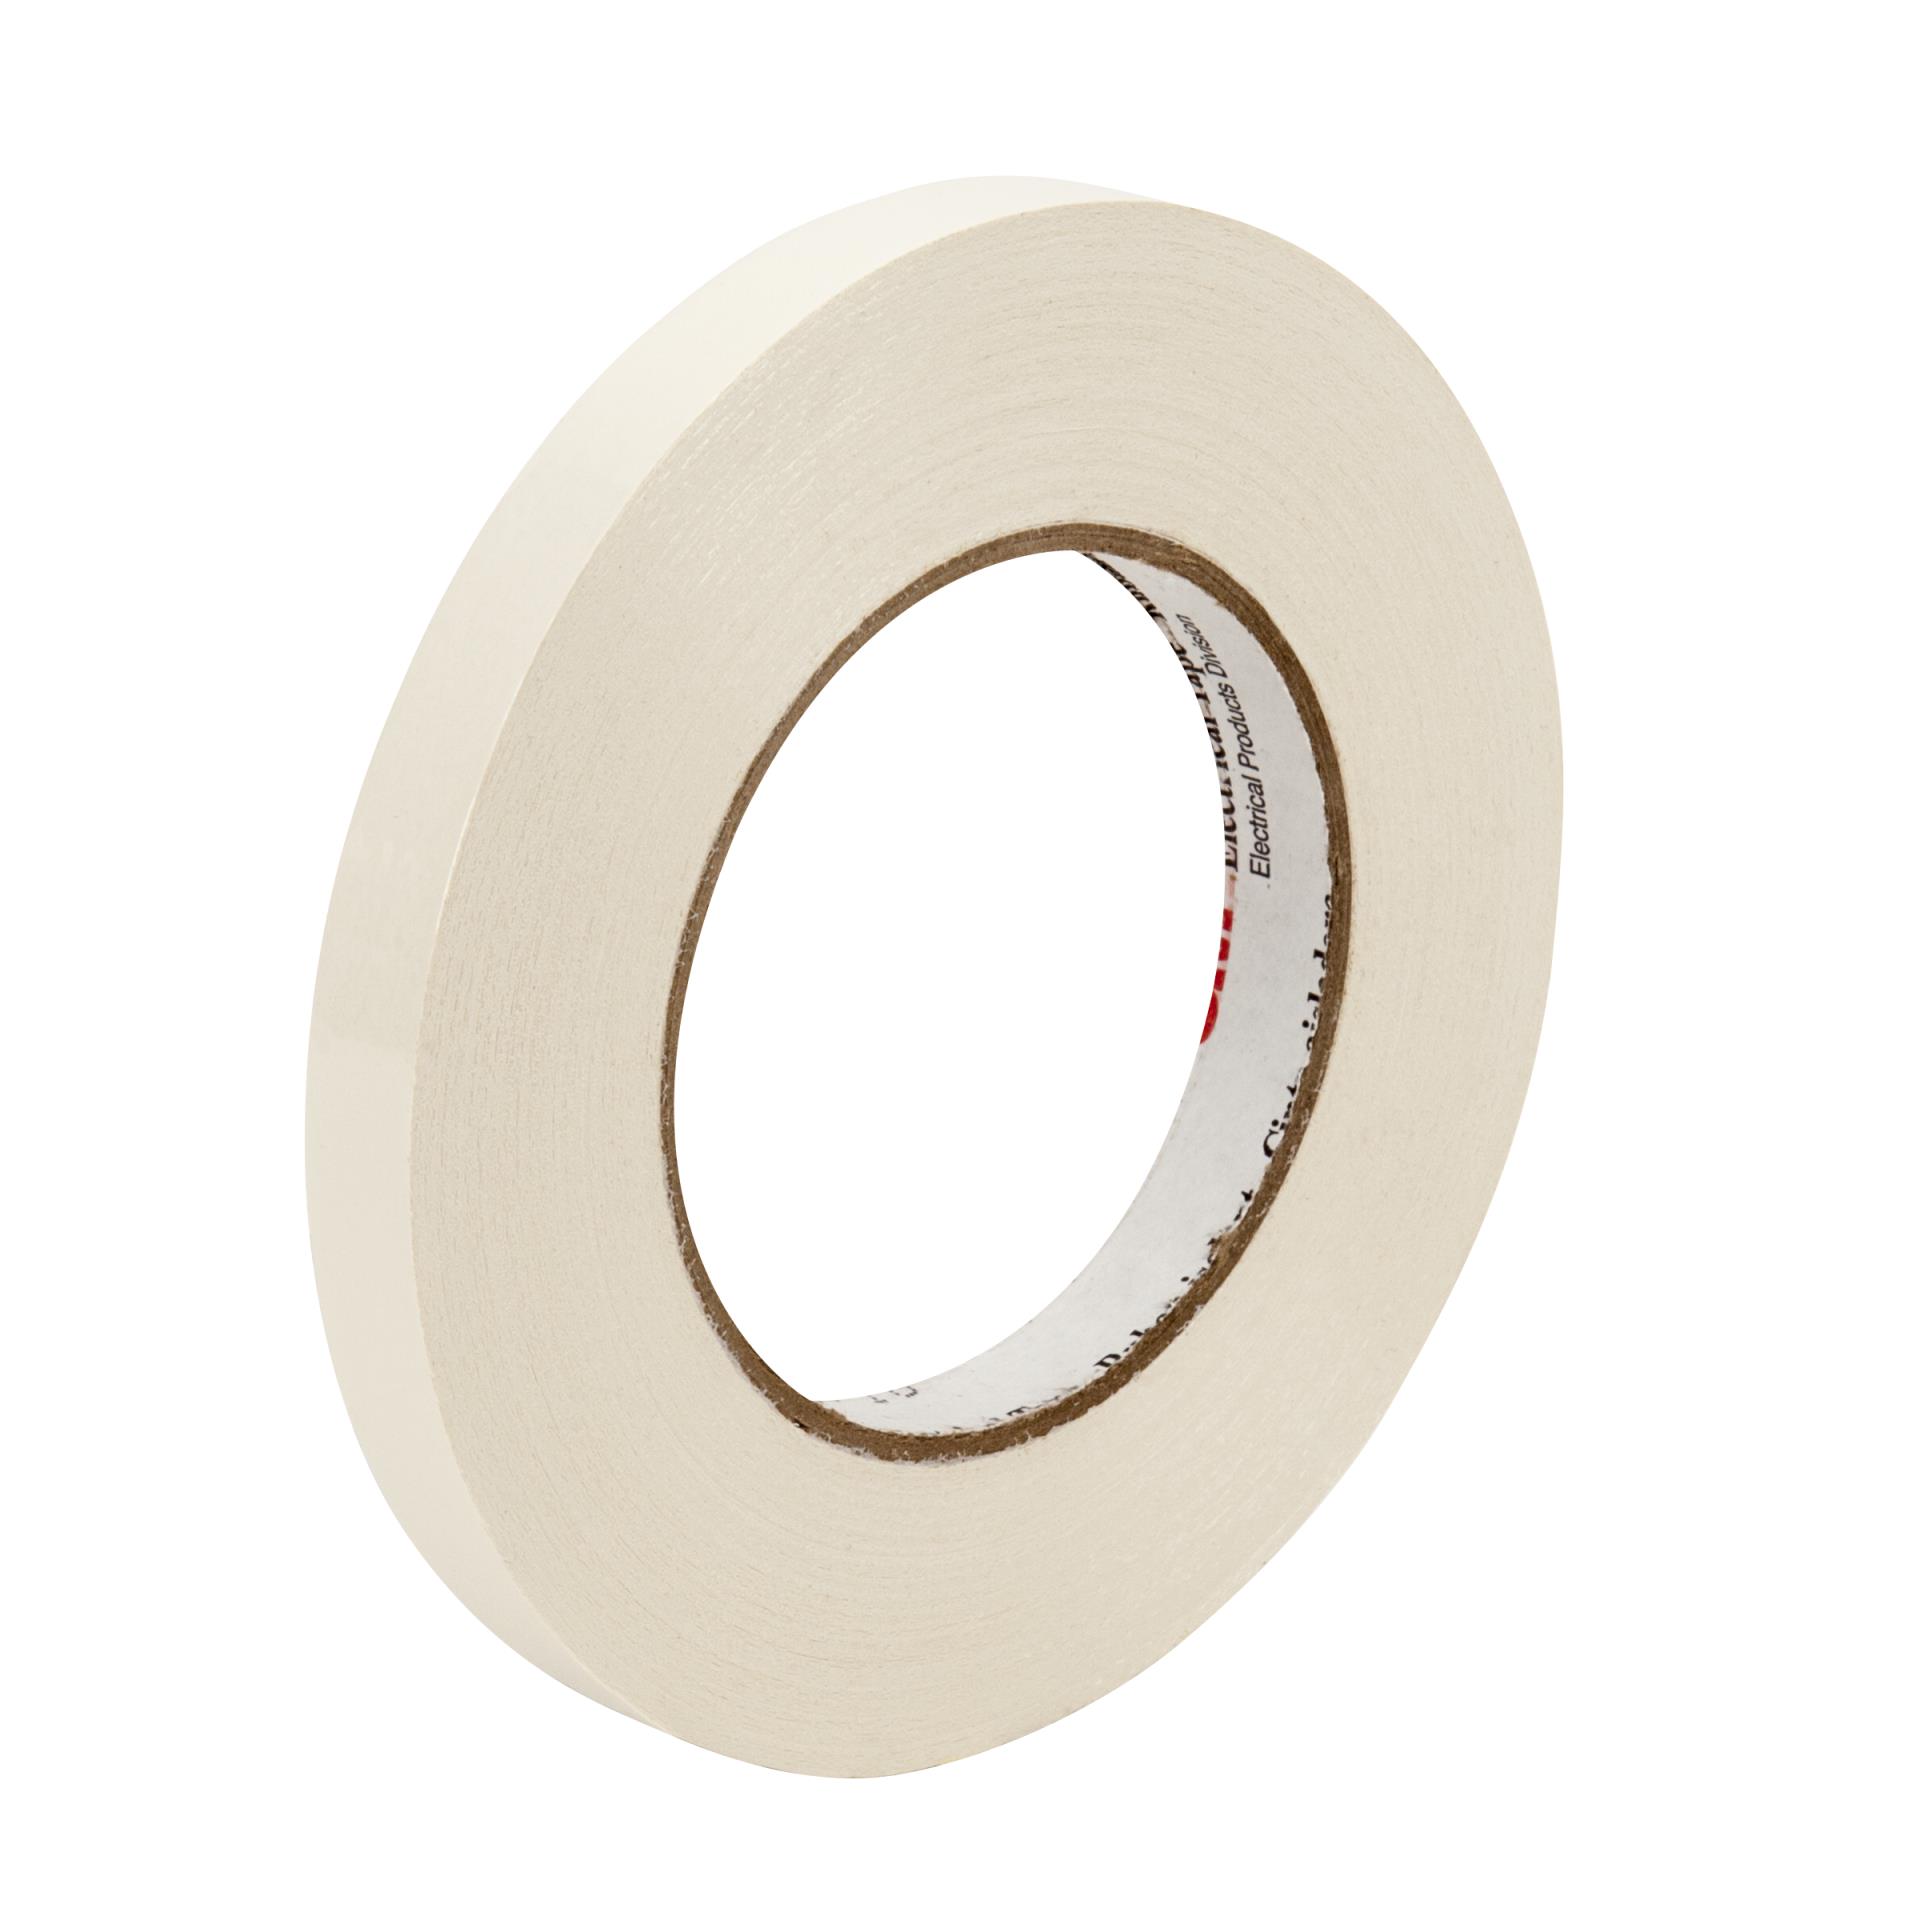 Pack-n-Tape  3M 9703 Electrically Conductive Tape, 12 in x 36 yd